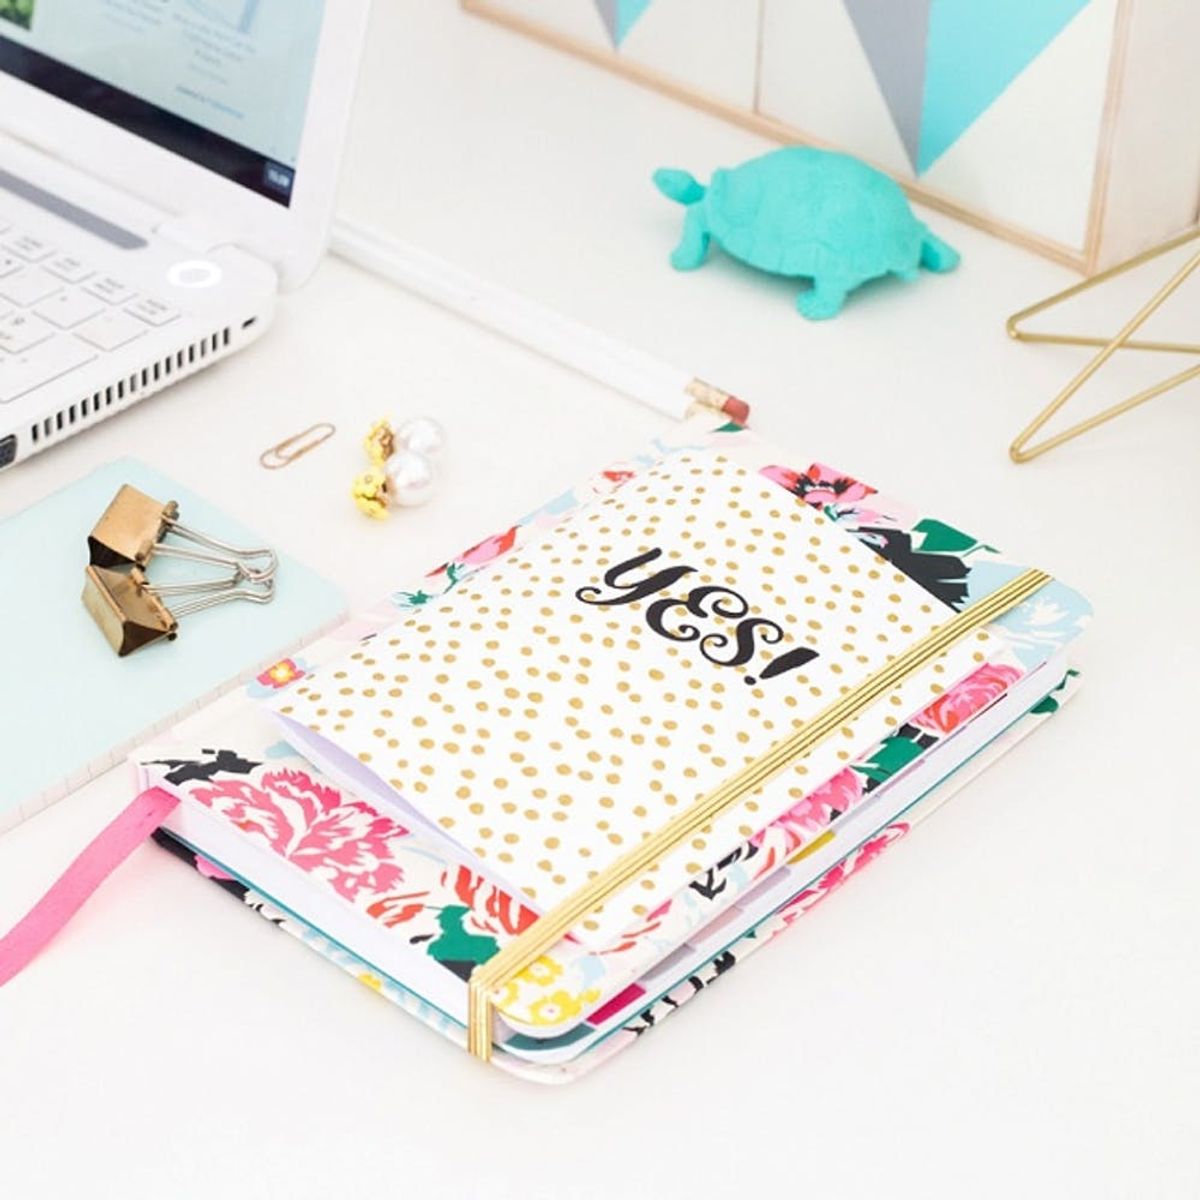 This DIY Notebook Will Help You Say Yes to All Your Goals